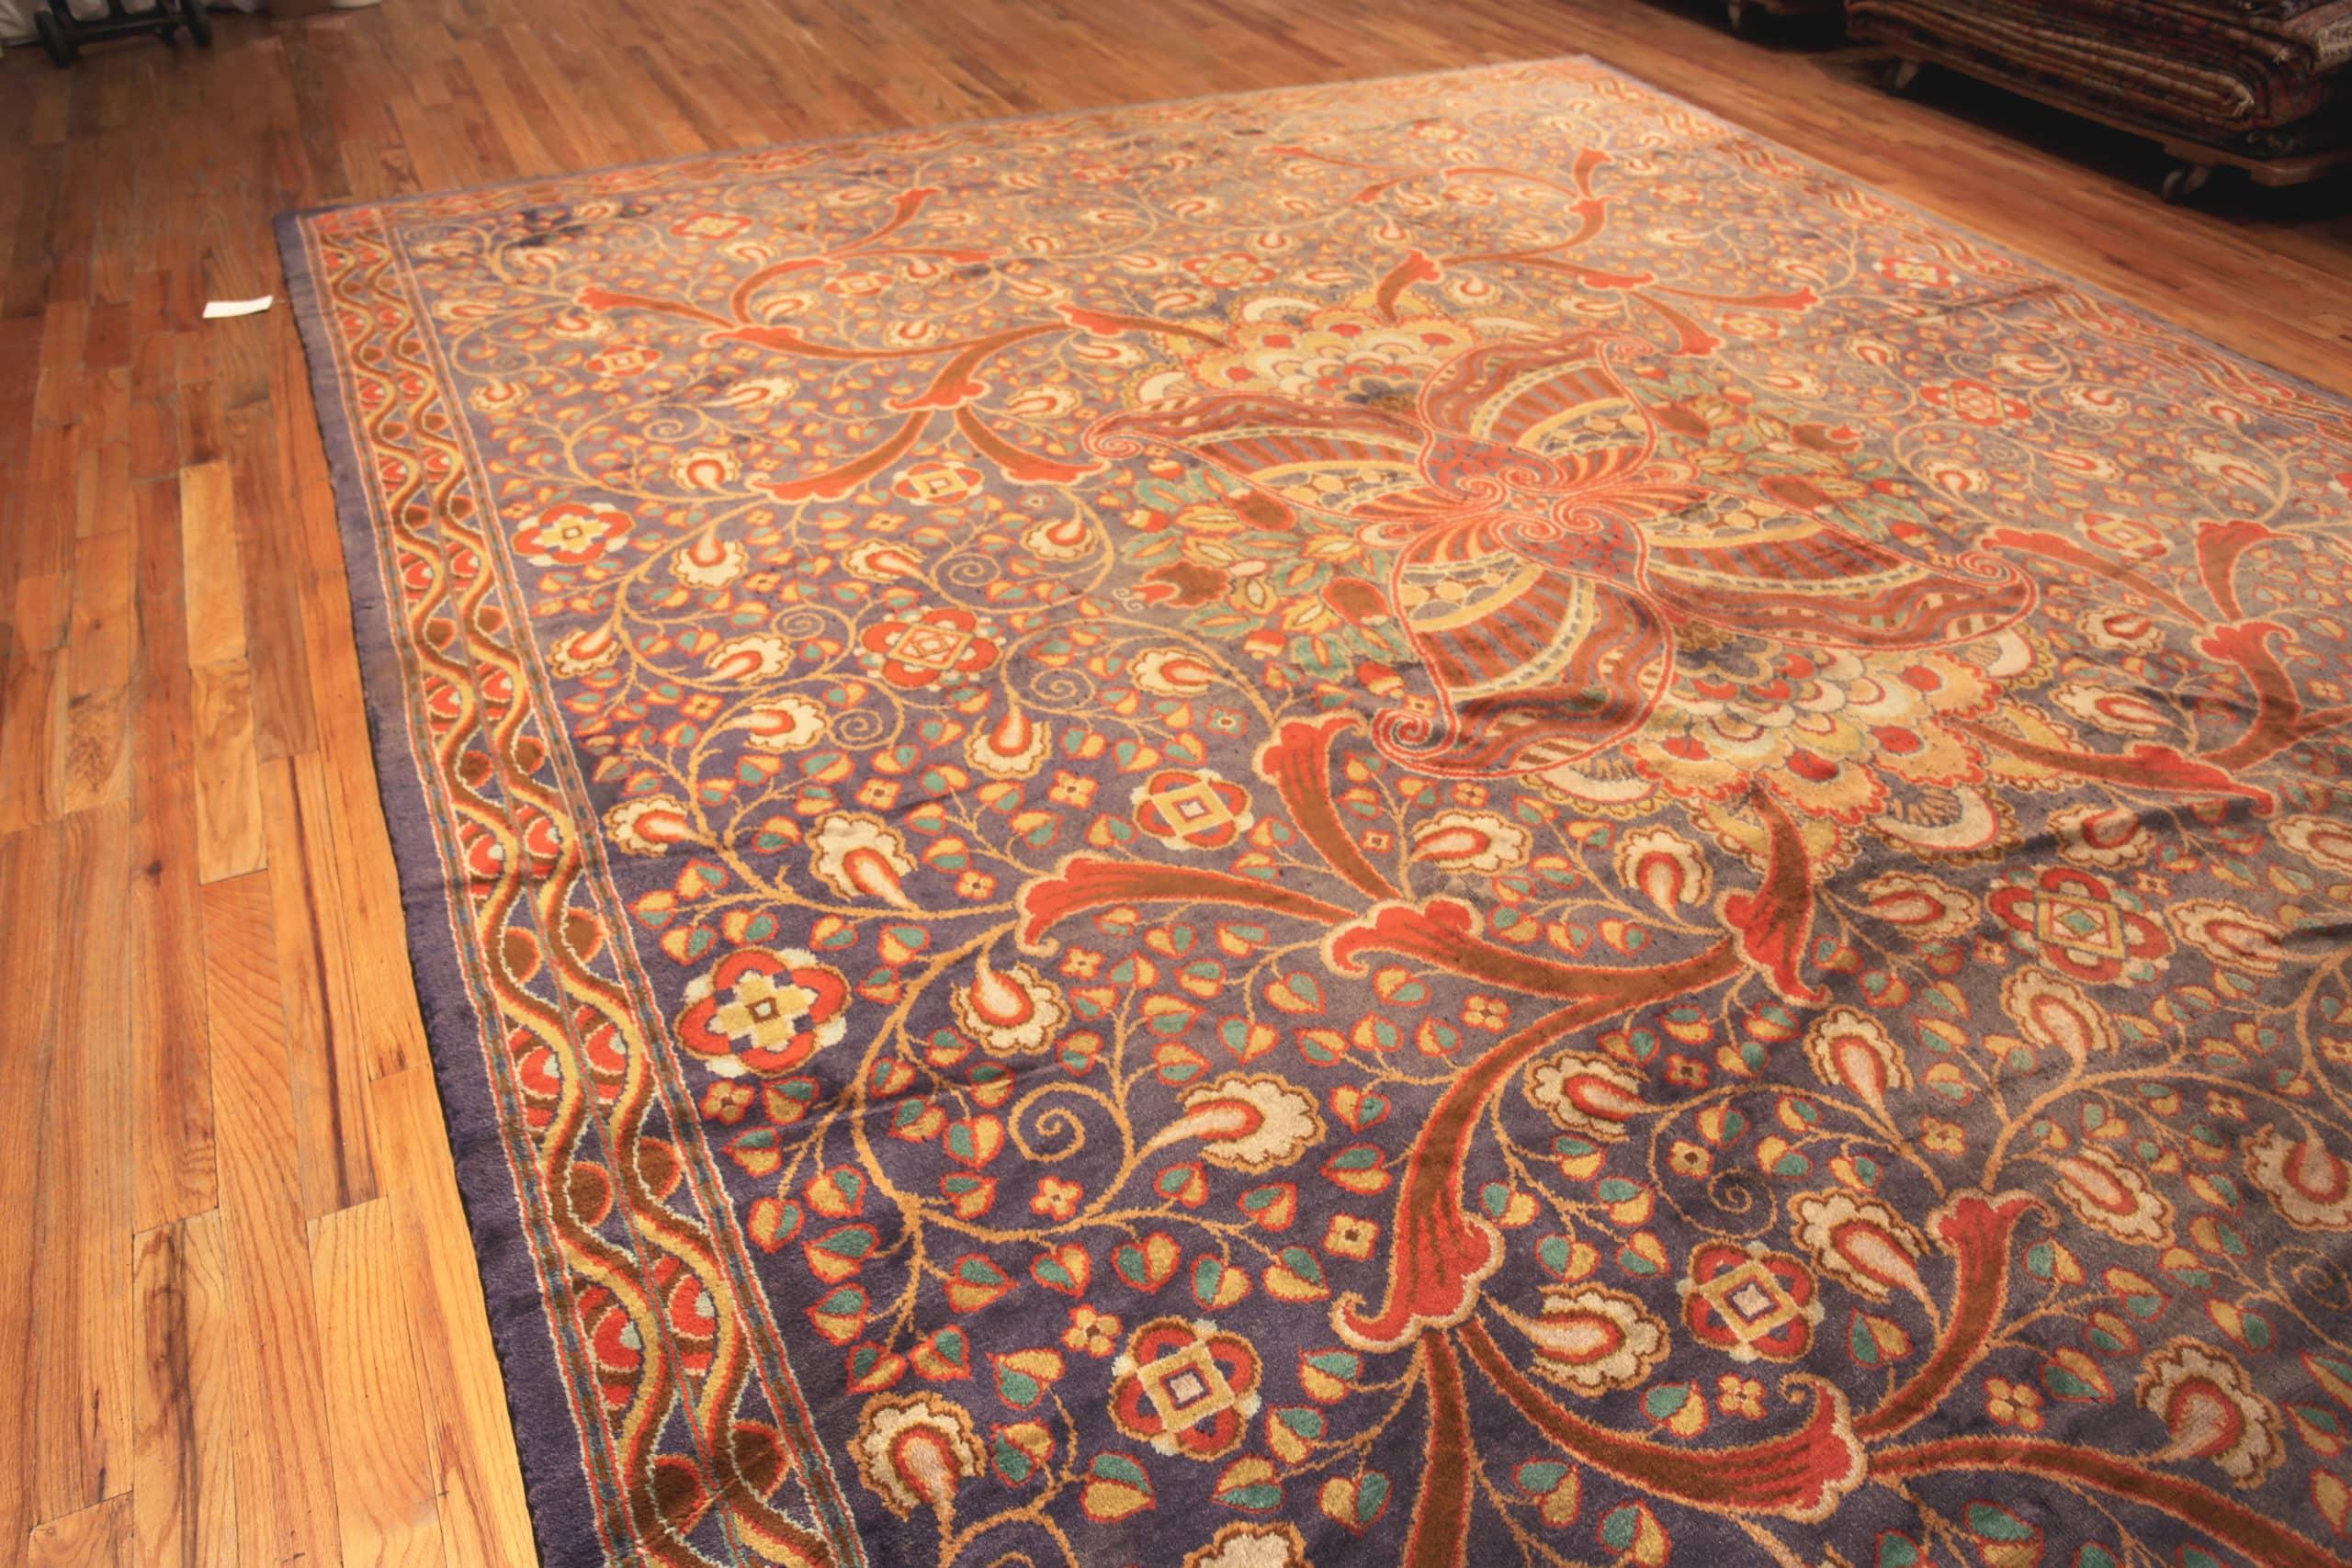 Beautiful Large Antique Irish Arts And Crafts Donegal Rug, Country Of Origin : Ireland, Circa Date: 1920 – Donegal Carpets was founded in 1898 by Alexander Morton. He was a textile manufacturer in Killybegs, near Ulster, Ireland. These rugs were